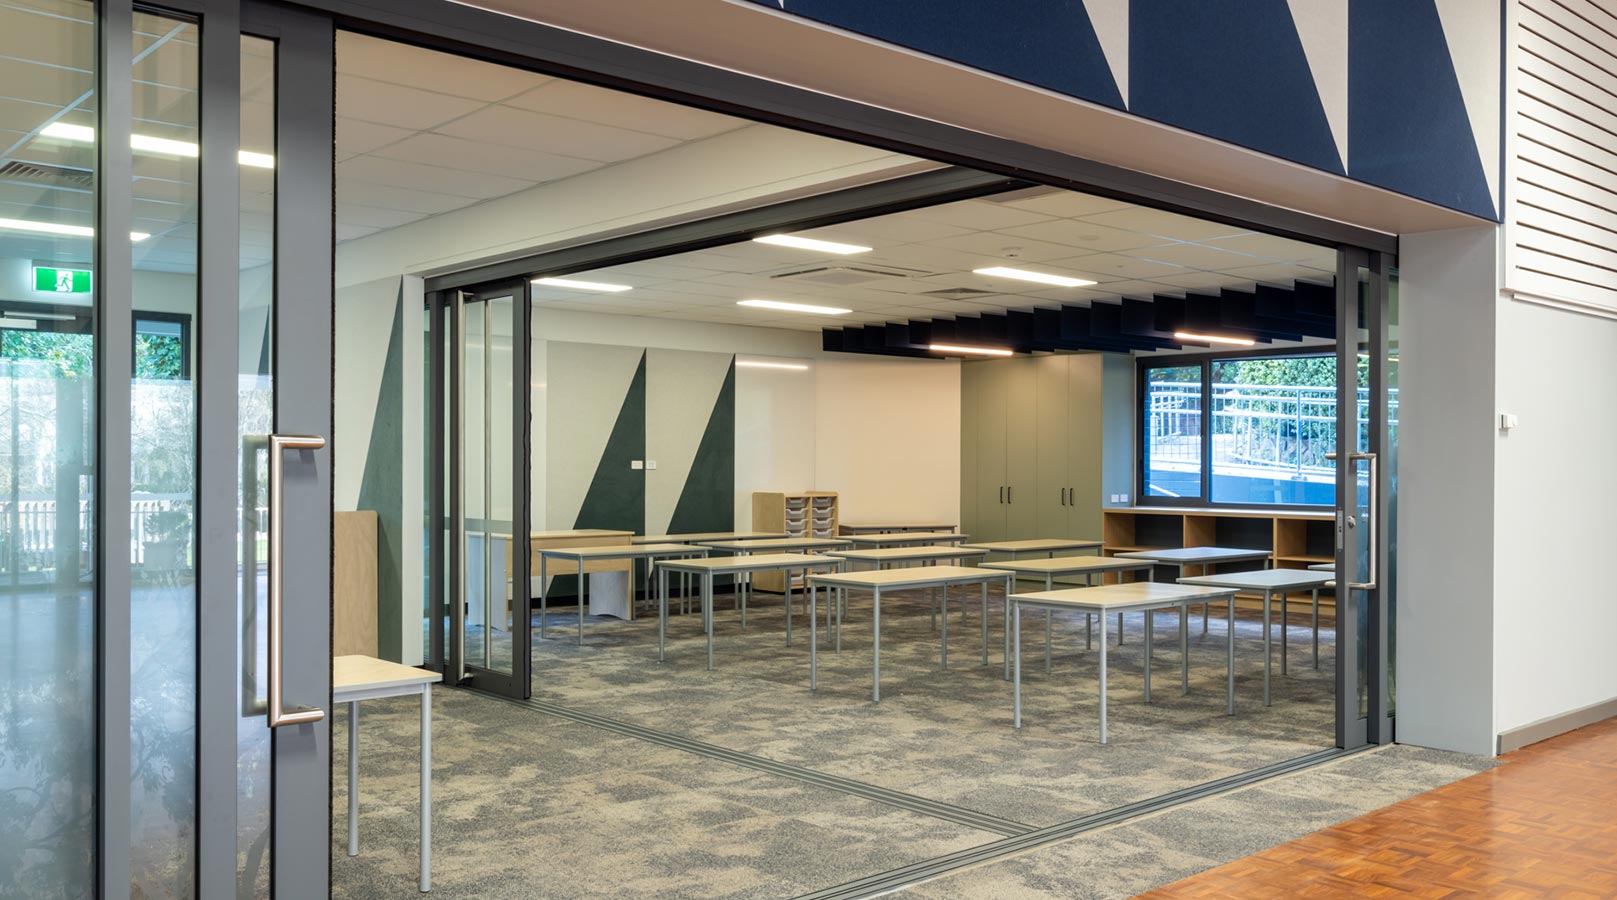 st catherines primary school adelaide construction fitout education interior room partition wall